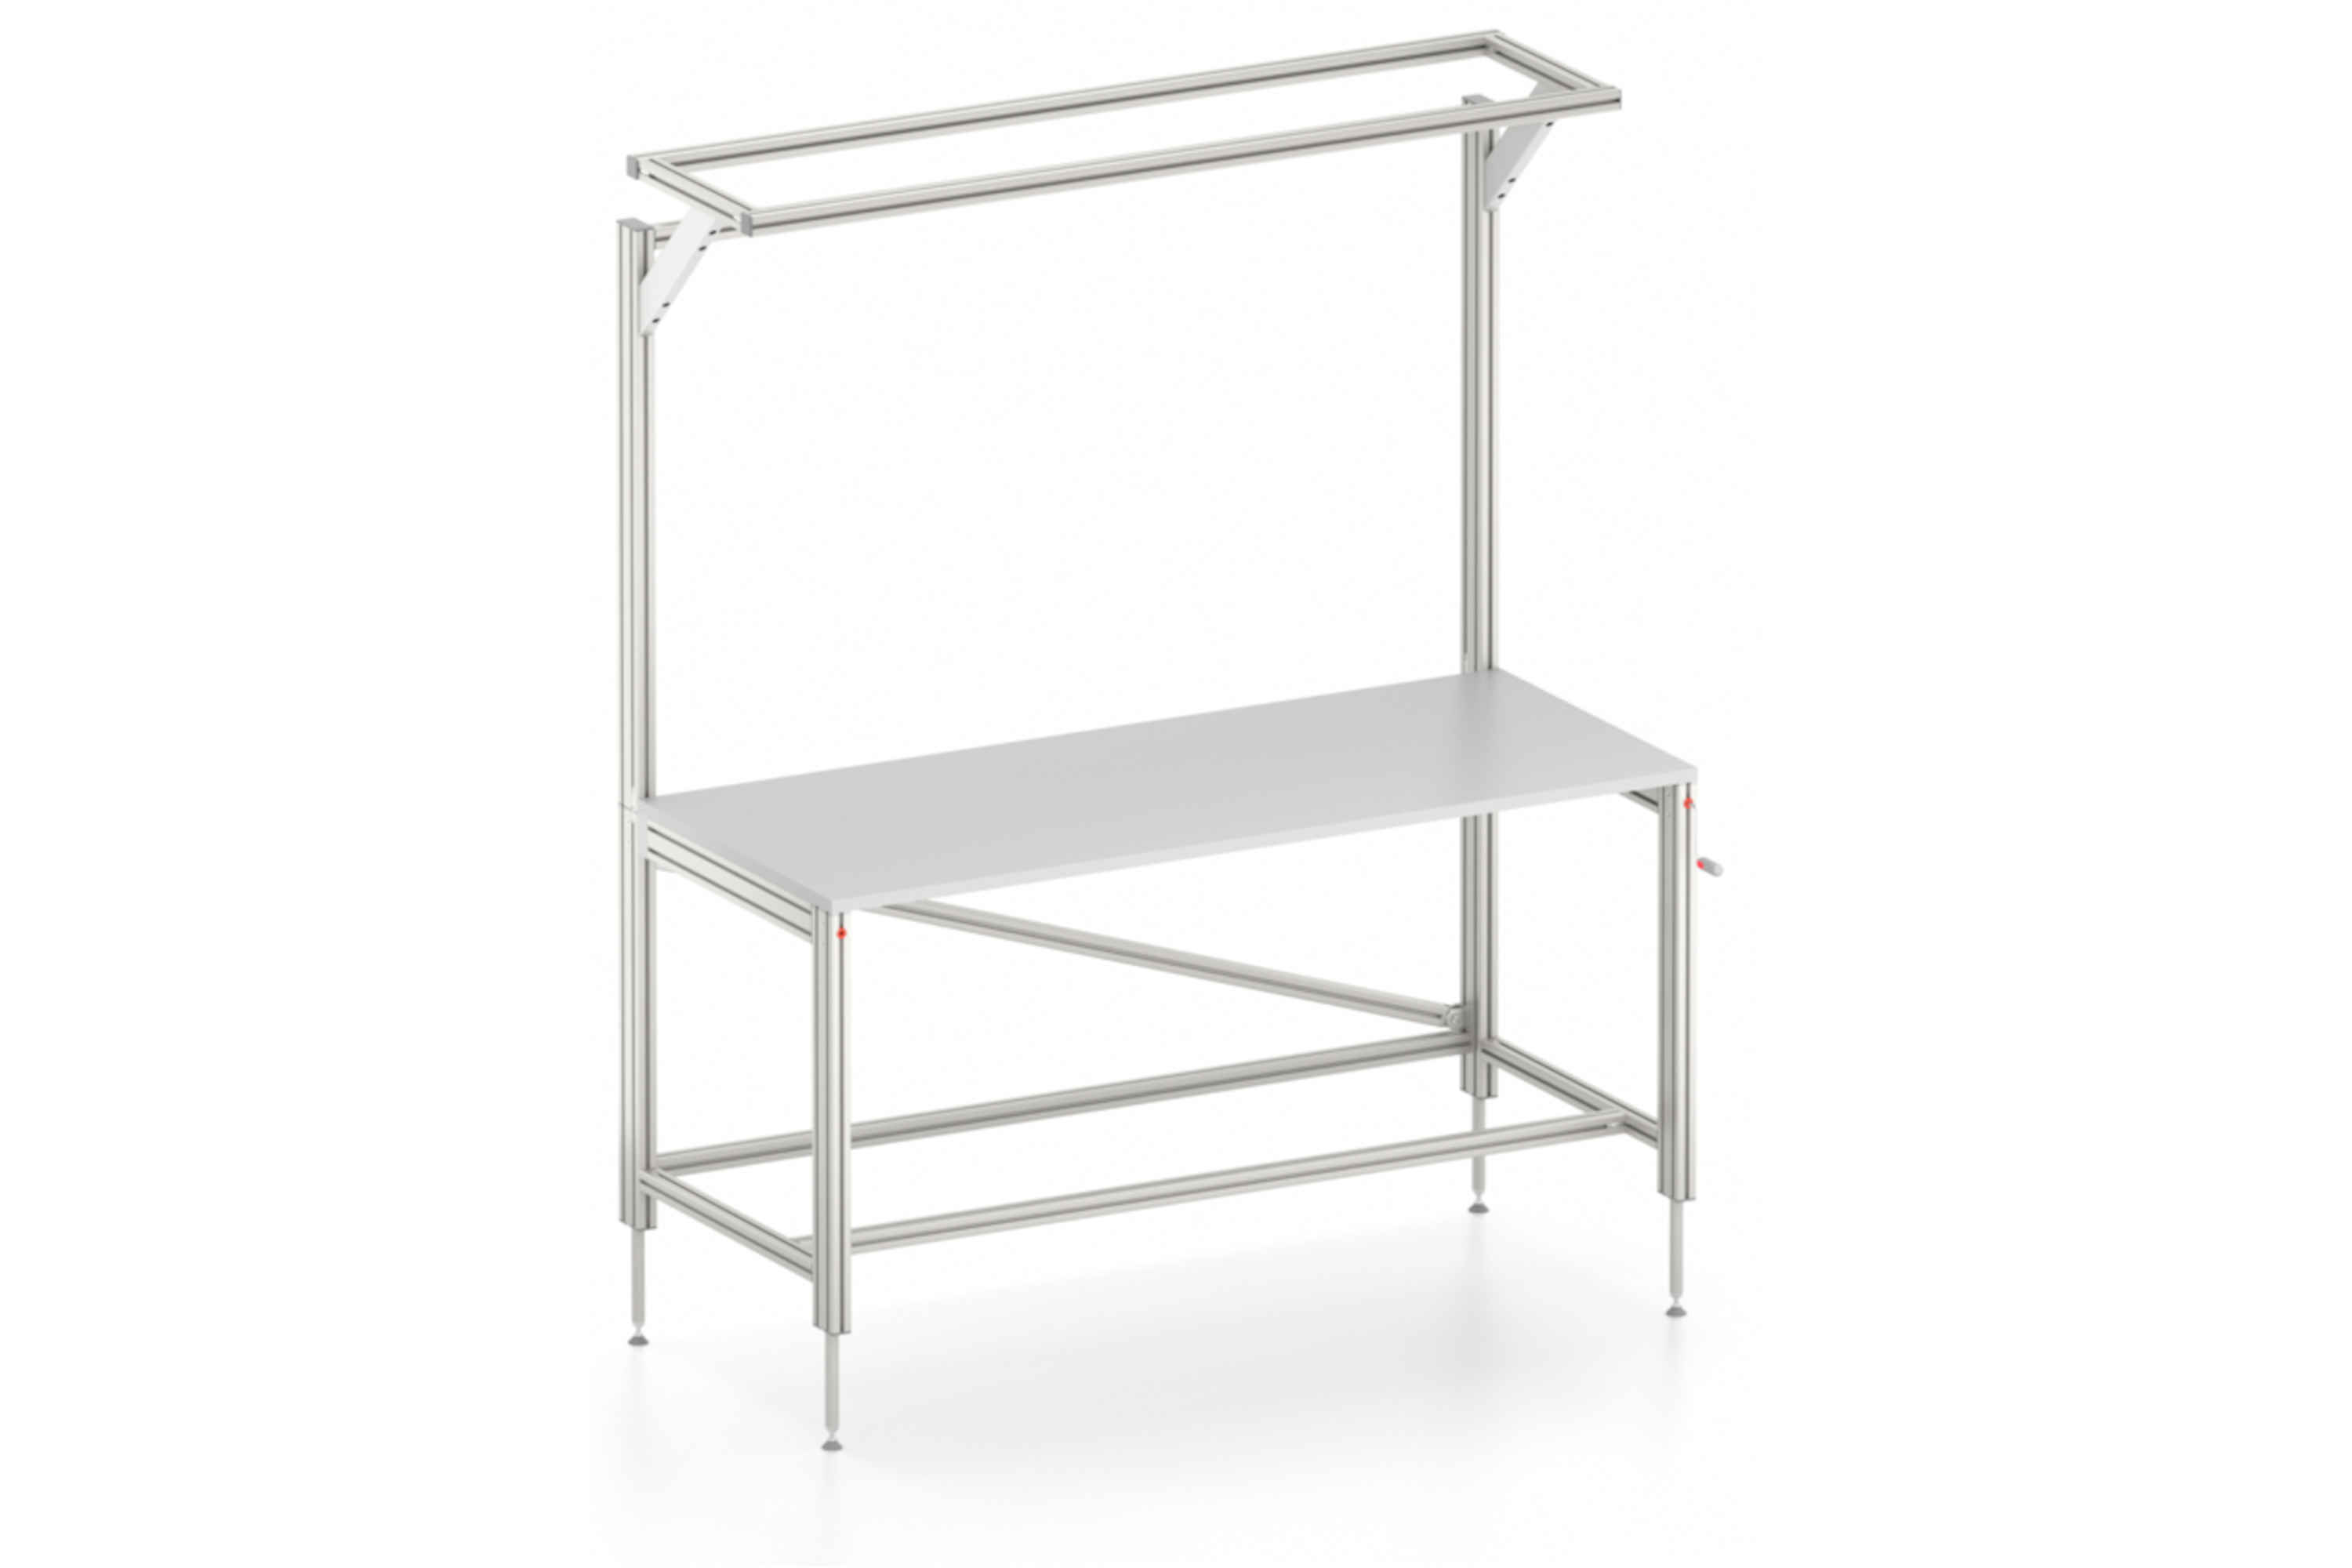 Manually height-adjustable table Economy 8 80x40 K with upright and overhang